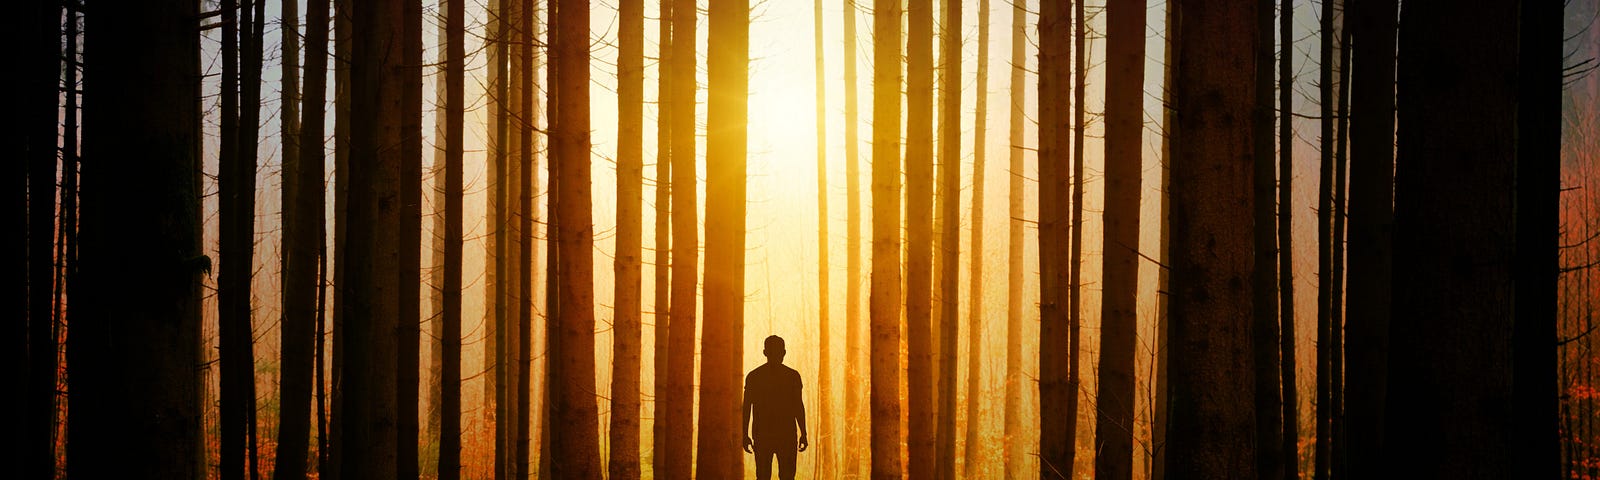 A man in front of blaring sunlight in a forest.